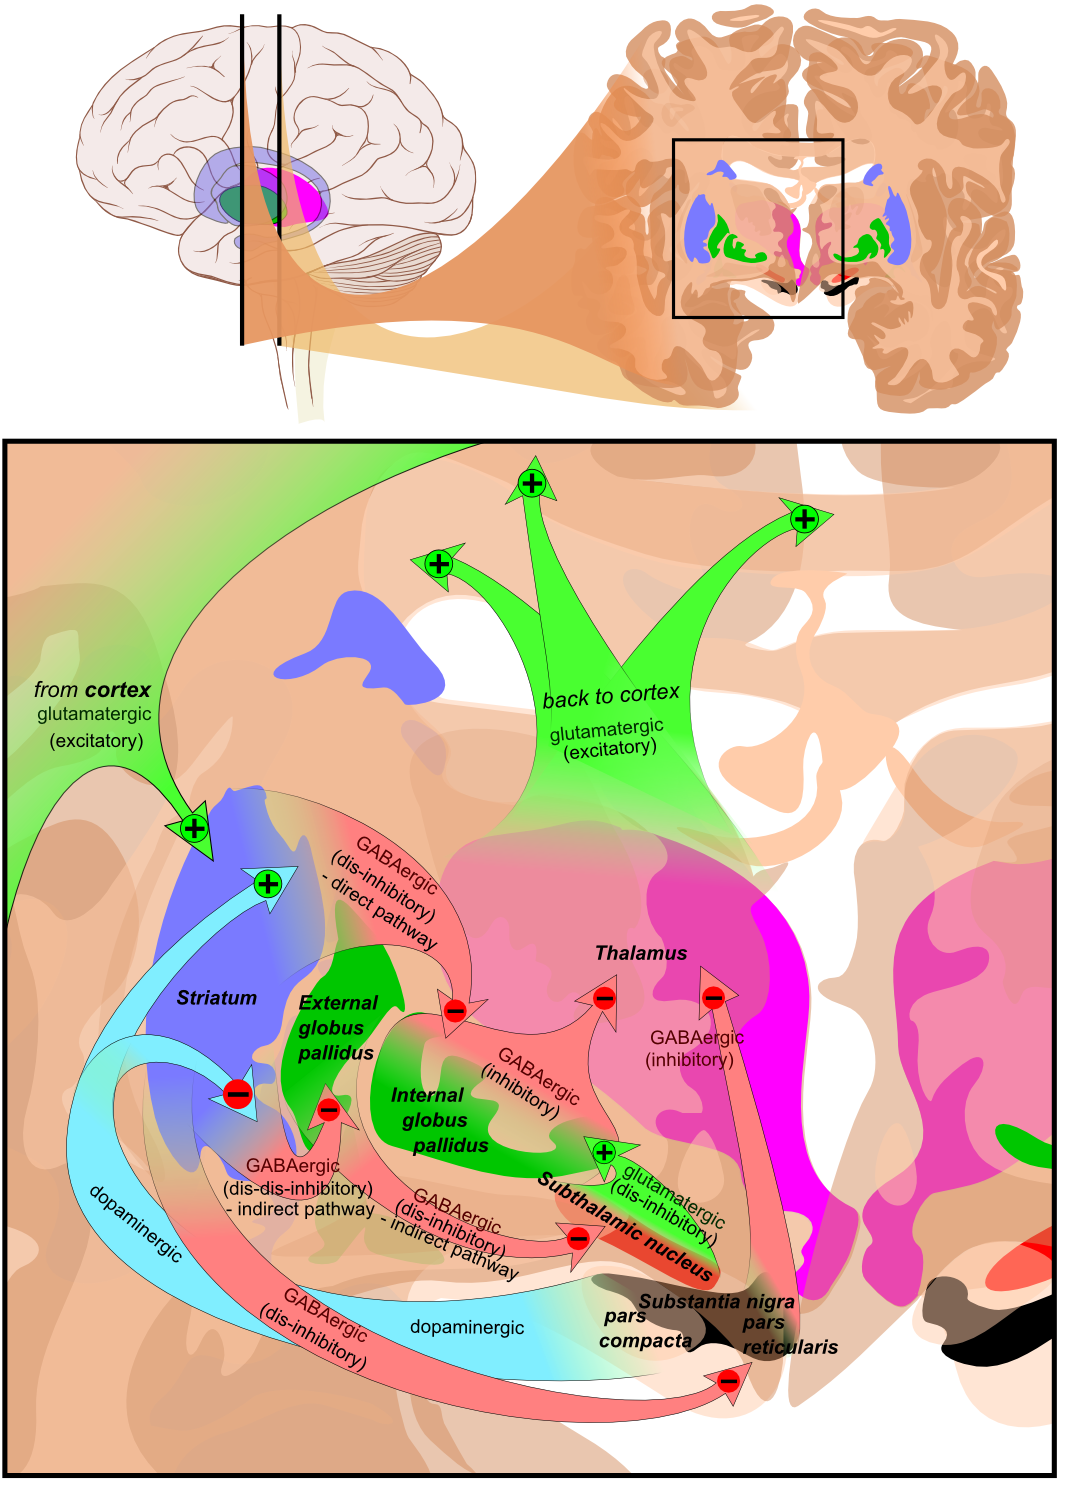 This is a diagram of the flow of excitatory and inhibitory pathways through the basal ganglia.